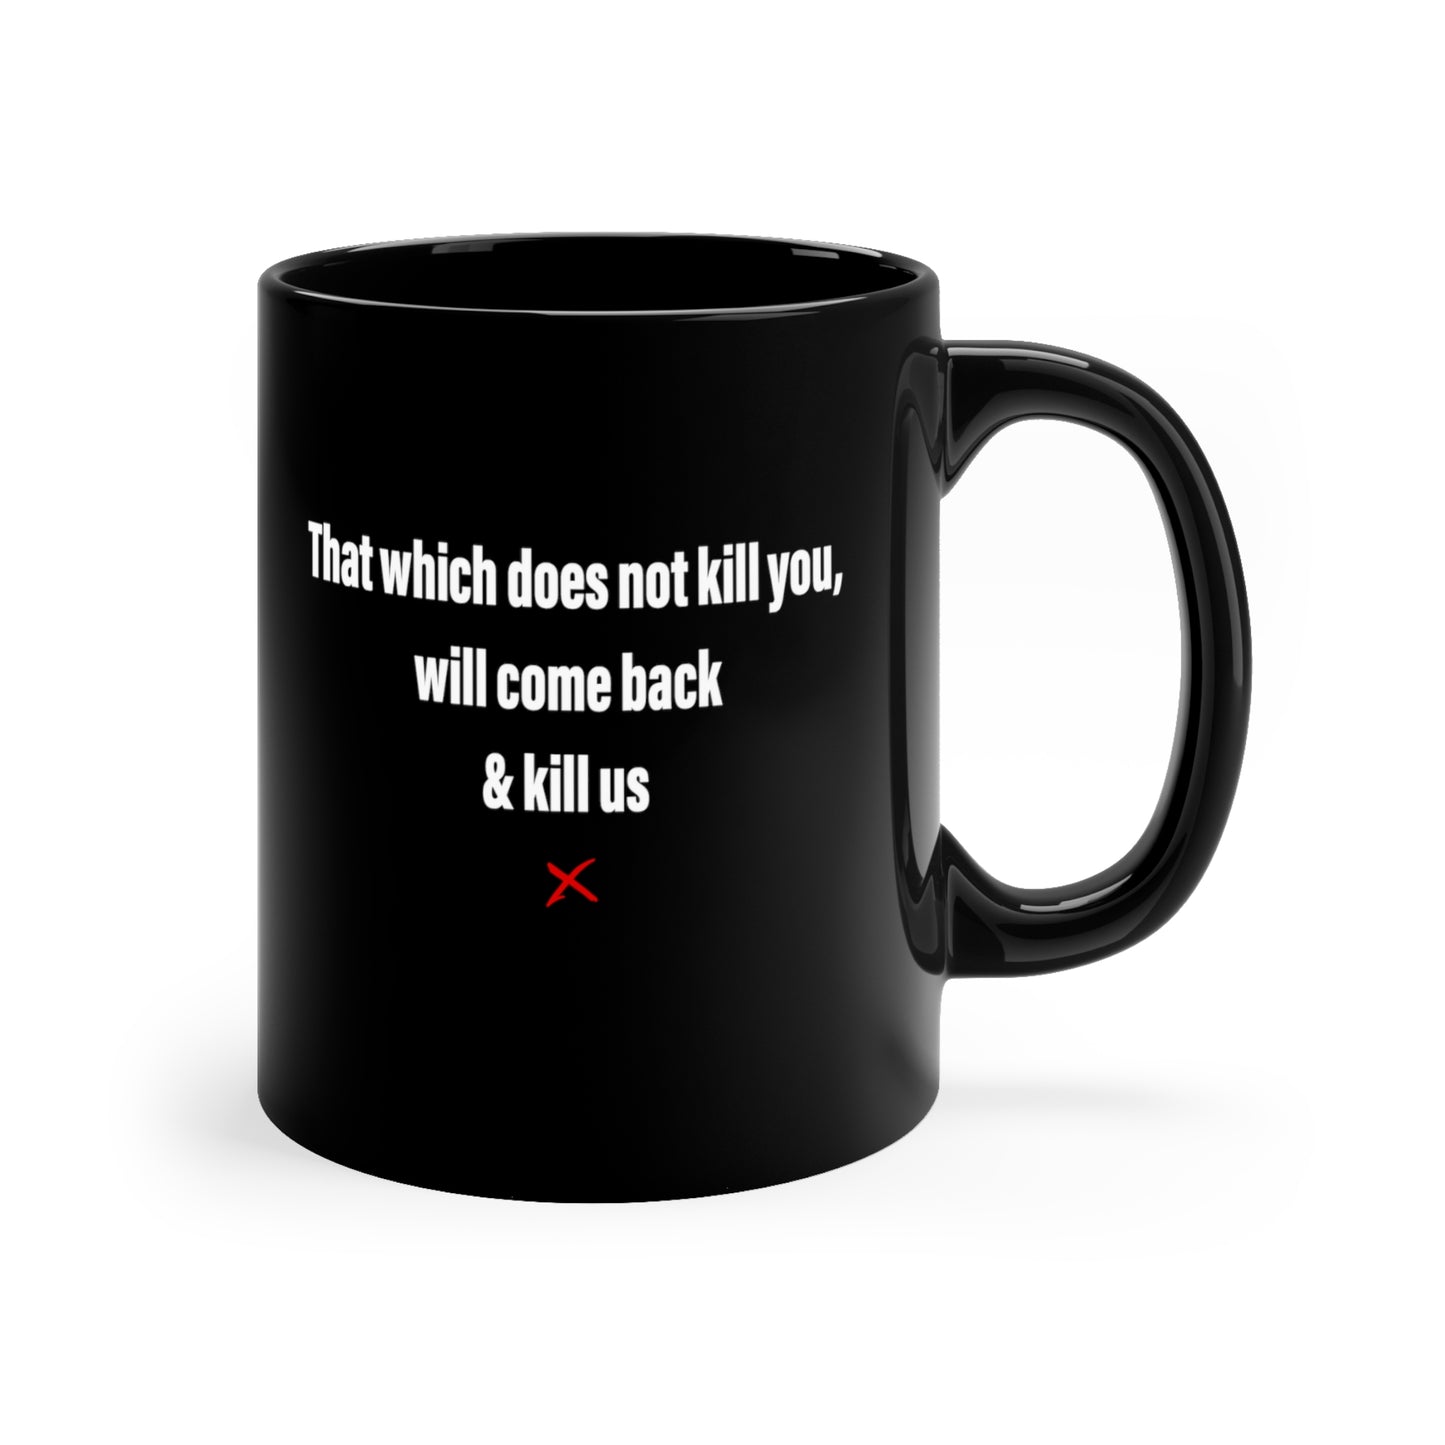 That which does not kill you, will come back & kill us - Mug